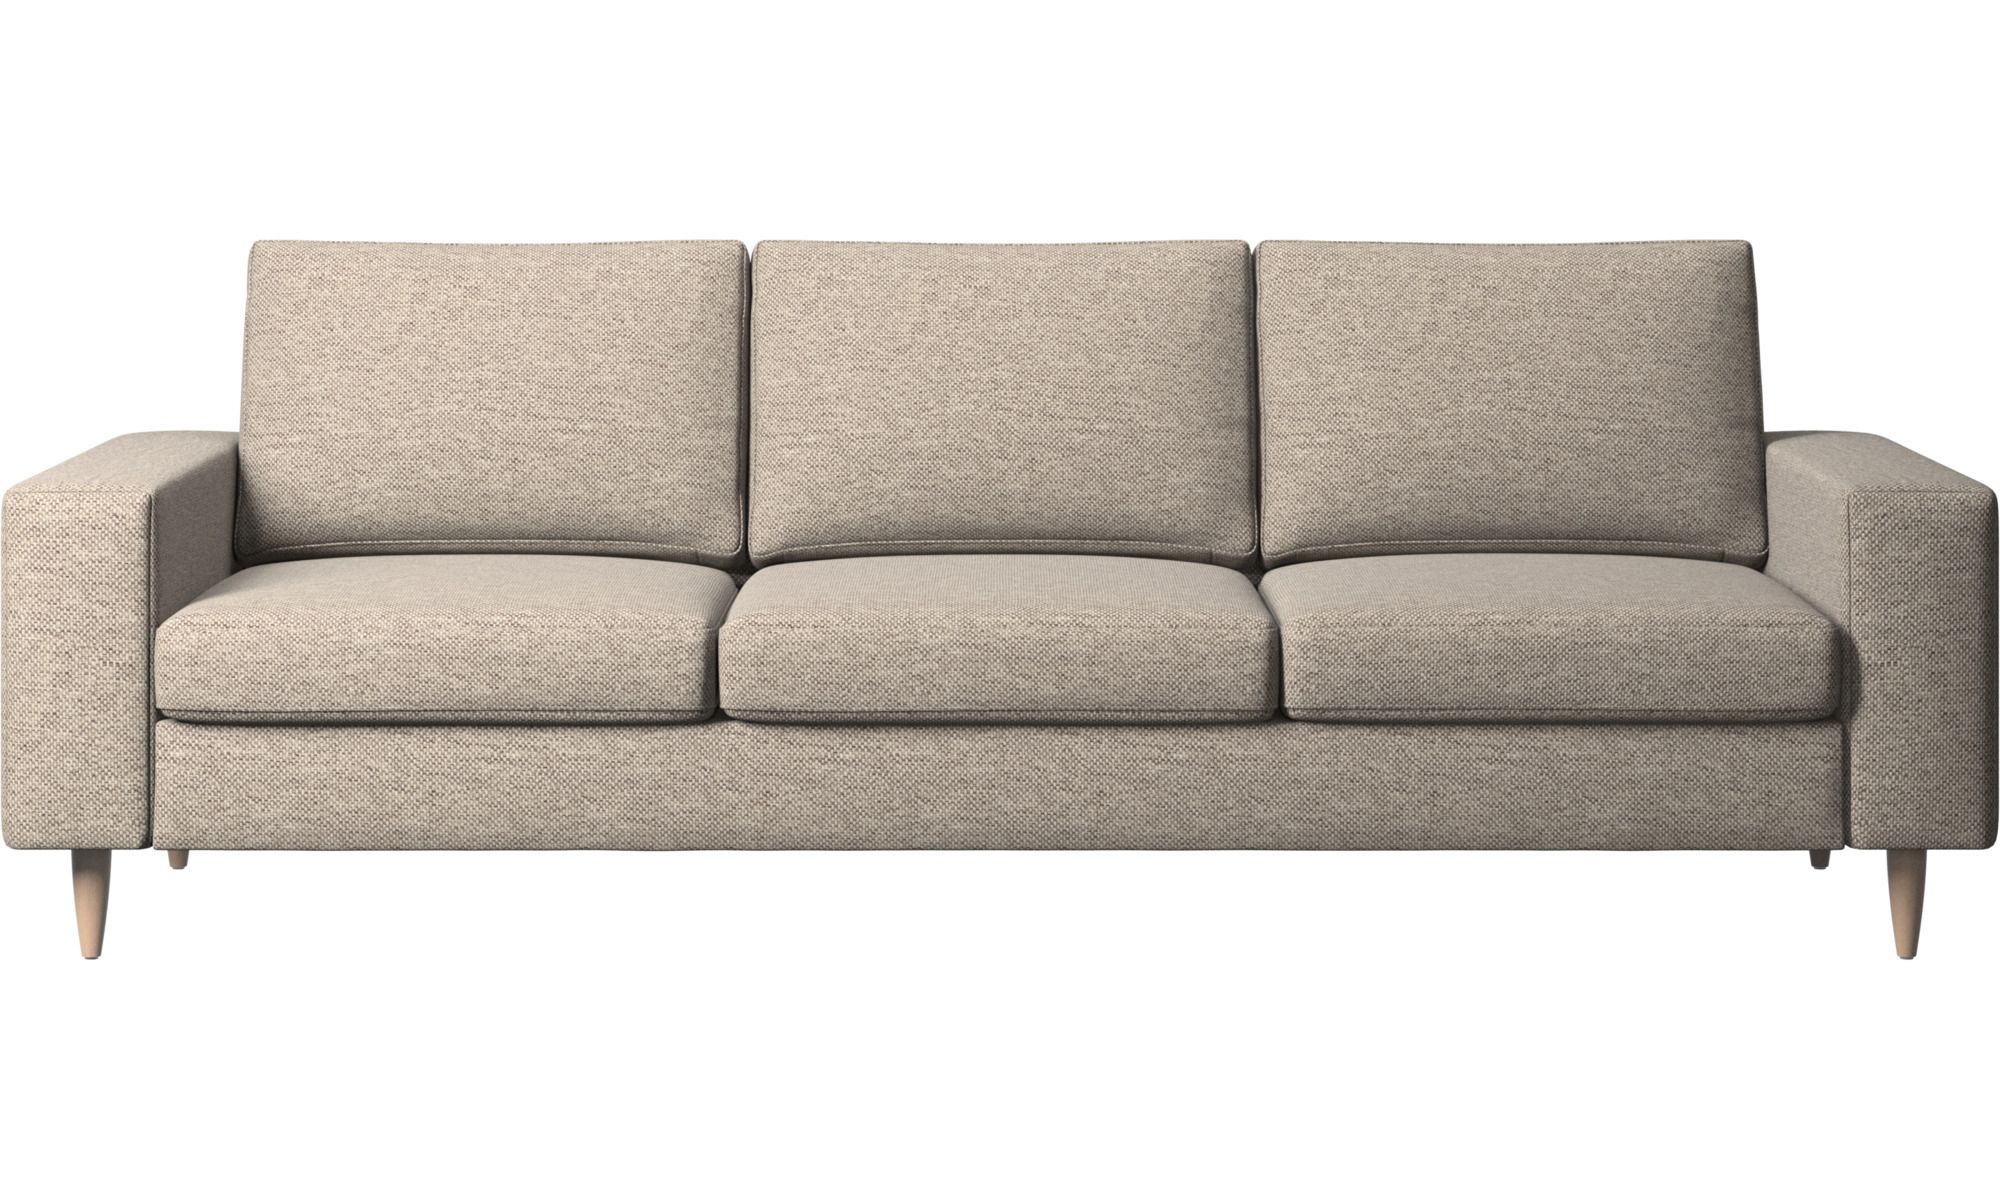 Indivi Divano – Visit Us For Styling Advice – Boconcept Intended For Sofas In Beige (View 2 of 15)